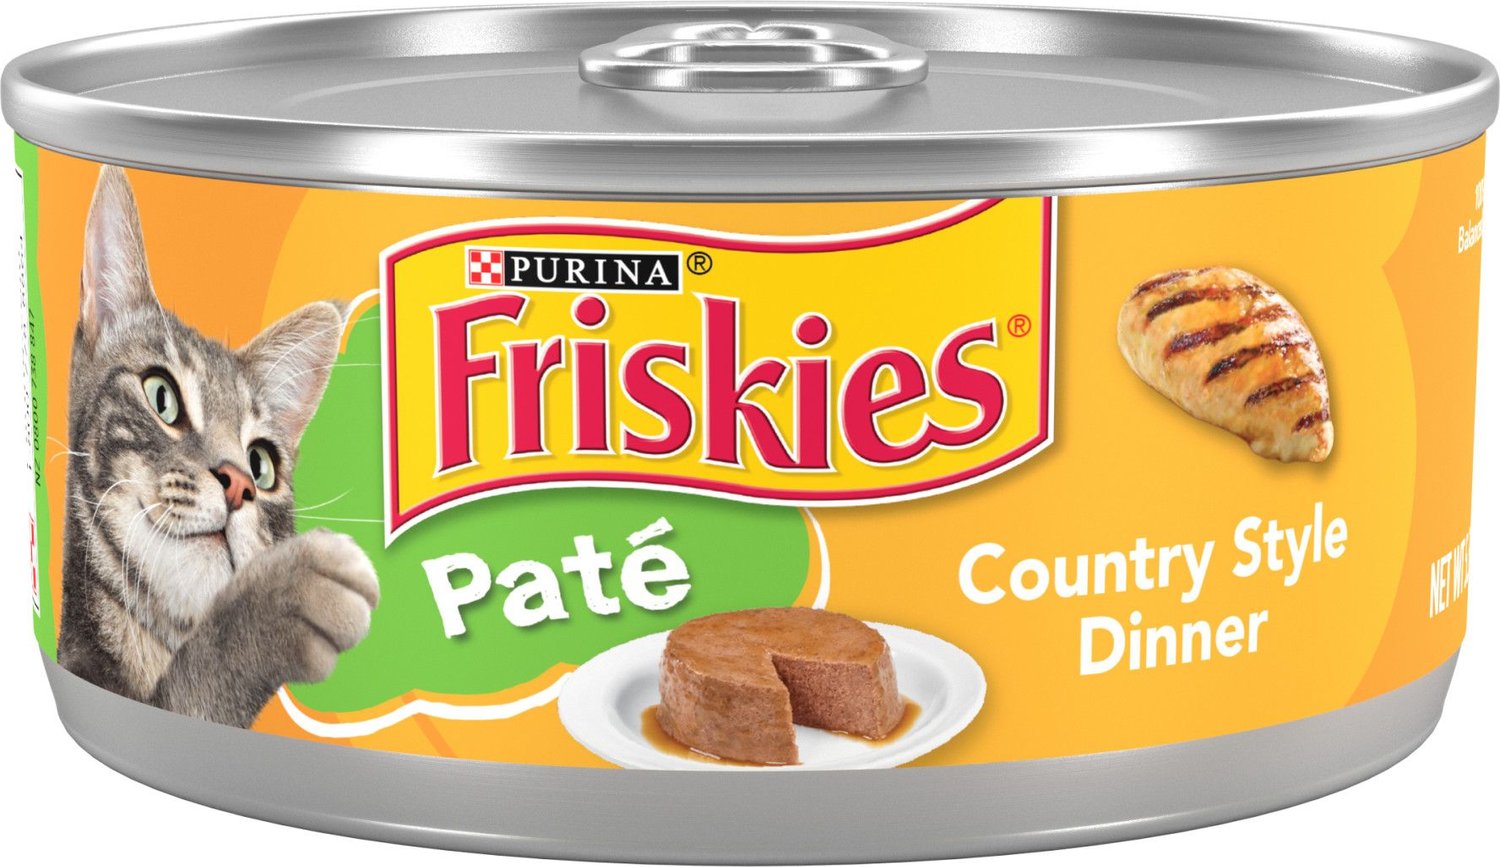 FRISKIES Pate Country Style Dinner Canned Cat Food, 5.5oz, case of 24